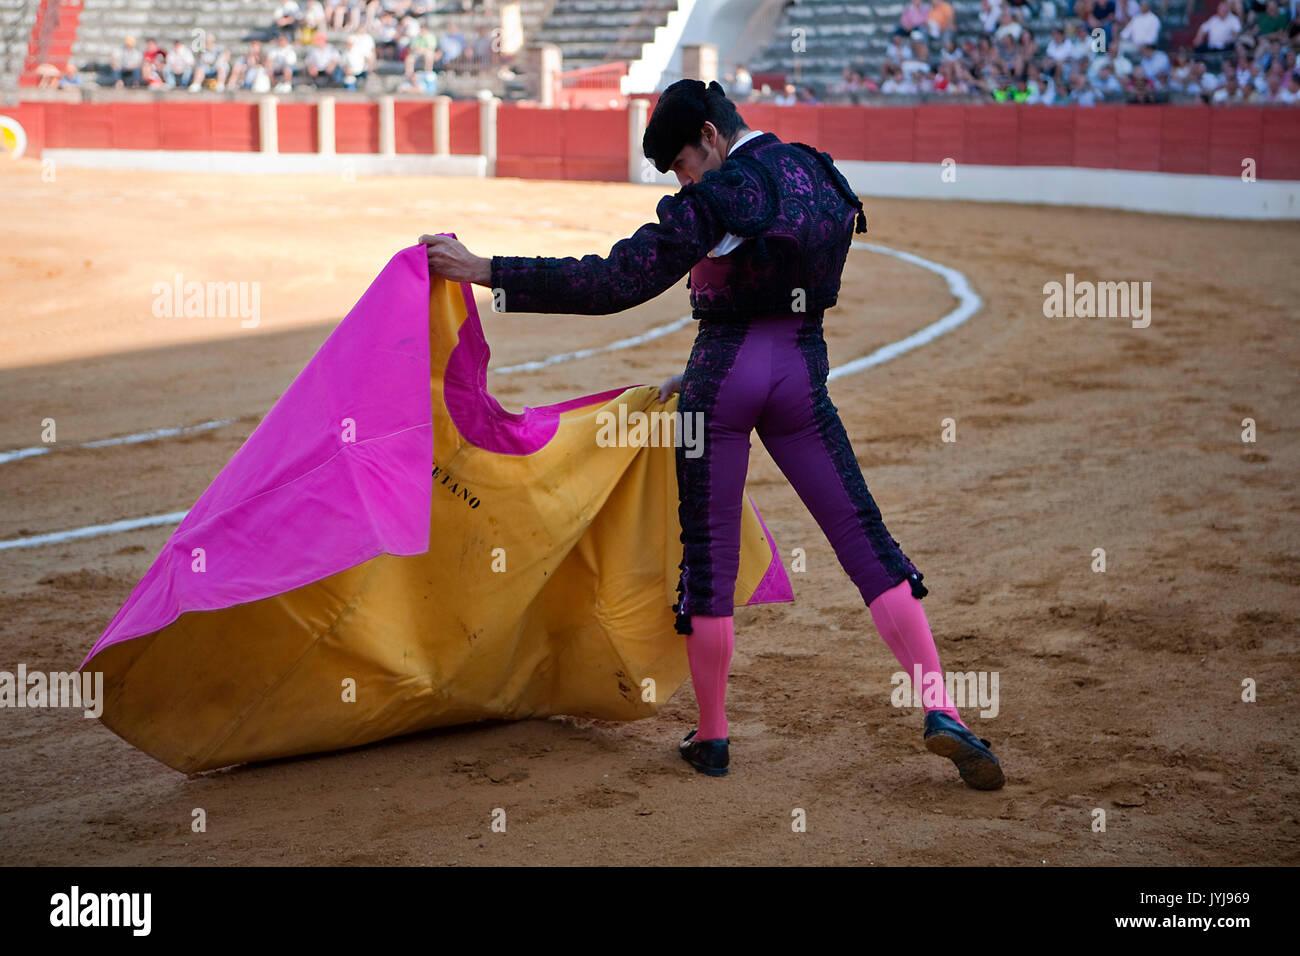 Bullfighter with the Cape before the Bullfight, Spain Stock Photo